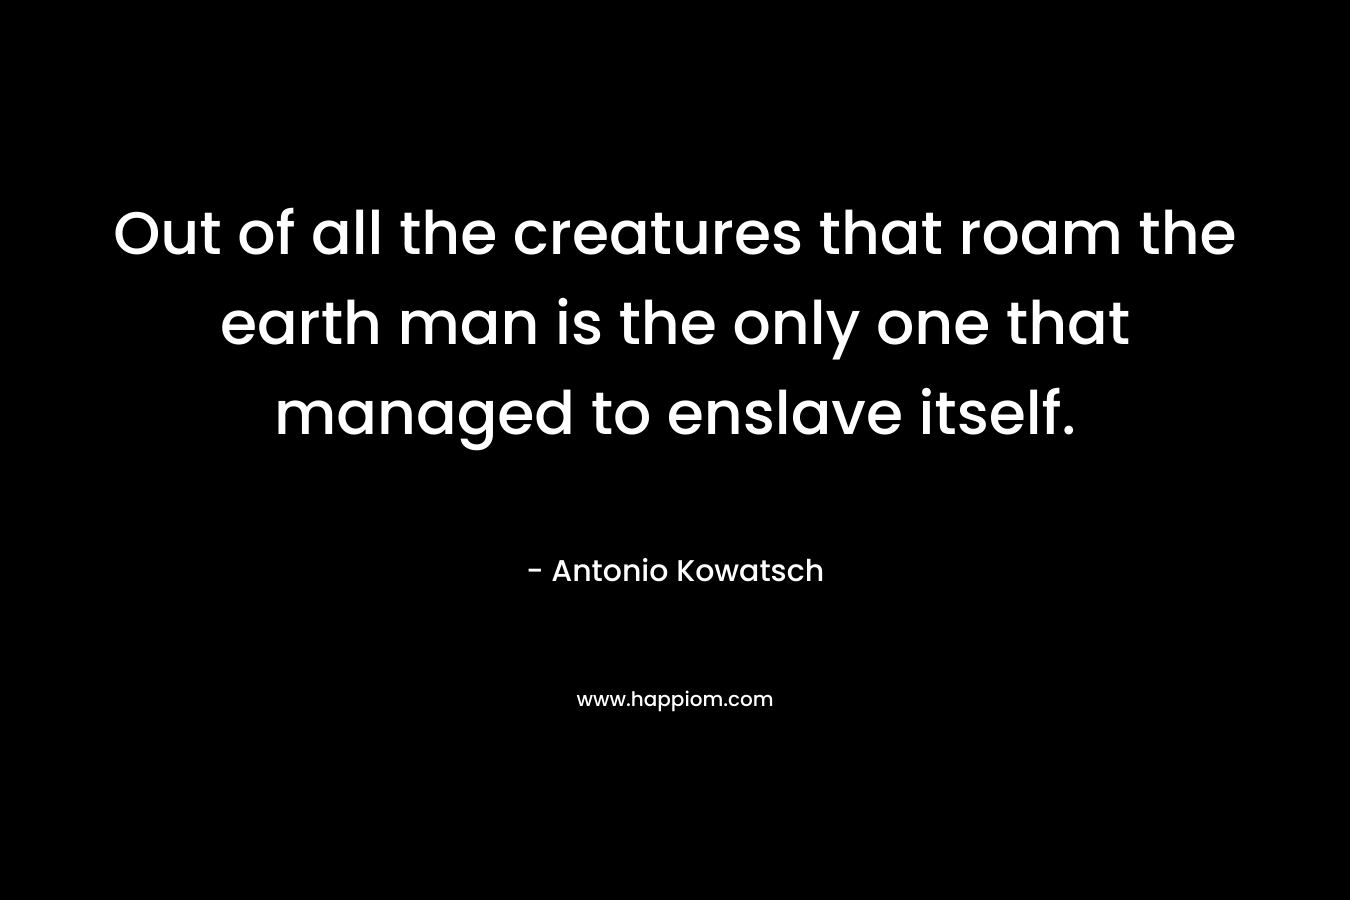 Out of all the creatures that roam the earth man is the only one that managed to enslave itself. – Antonio Kowatsch